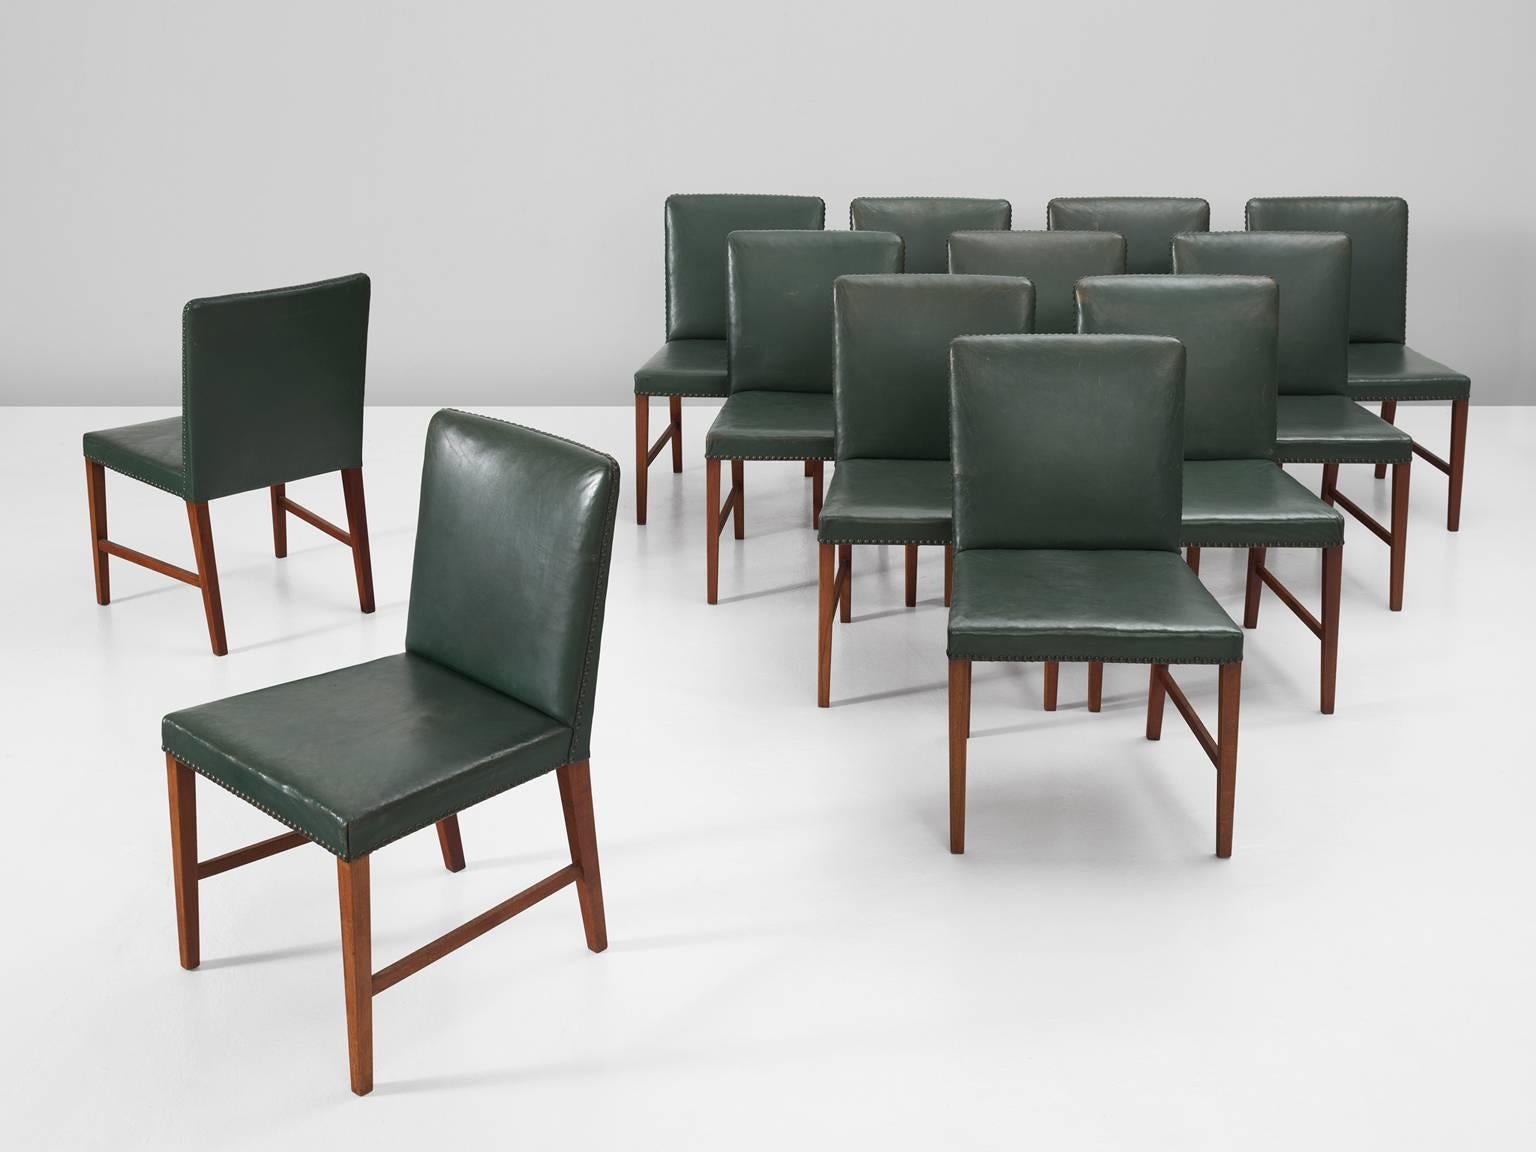 Hi Brandon! The price is including shipping and for 8 chairs. 

--------------------------------------------------------------------------------------------

Set of 8 chairs, in leather and teak by Illum Wikkelsø, Denmark, 1950s.

Large set of 8